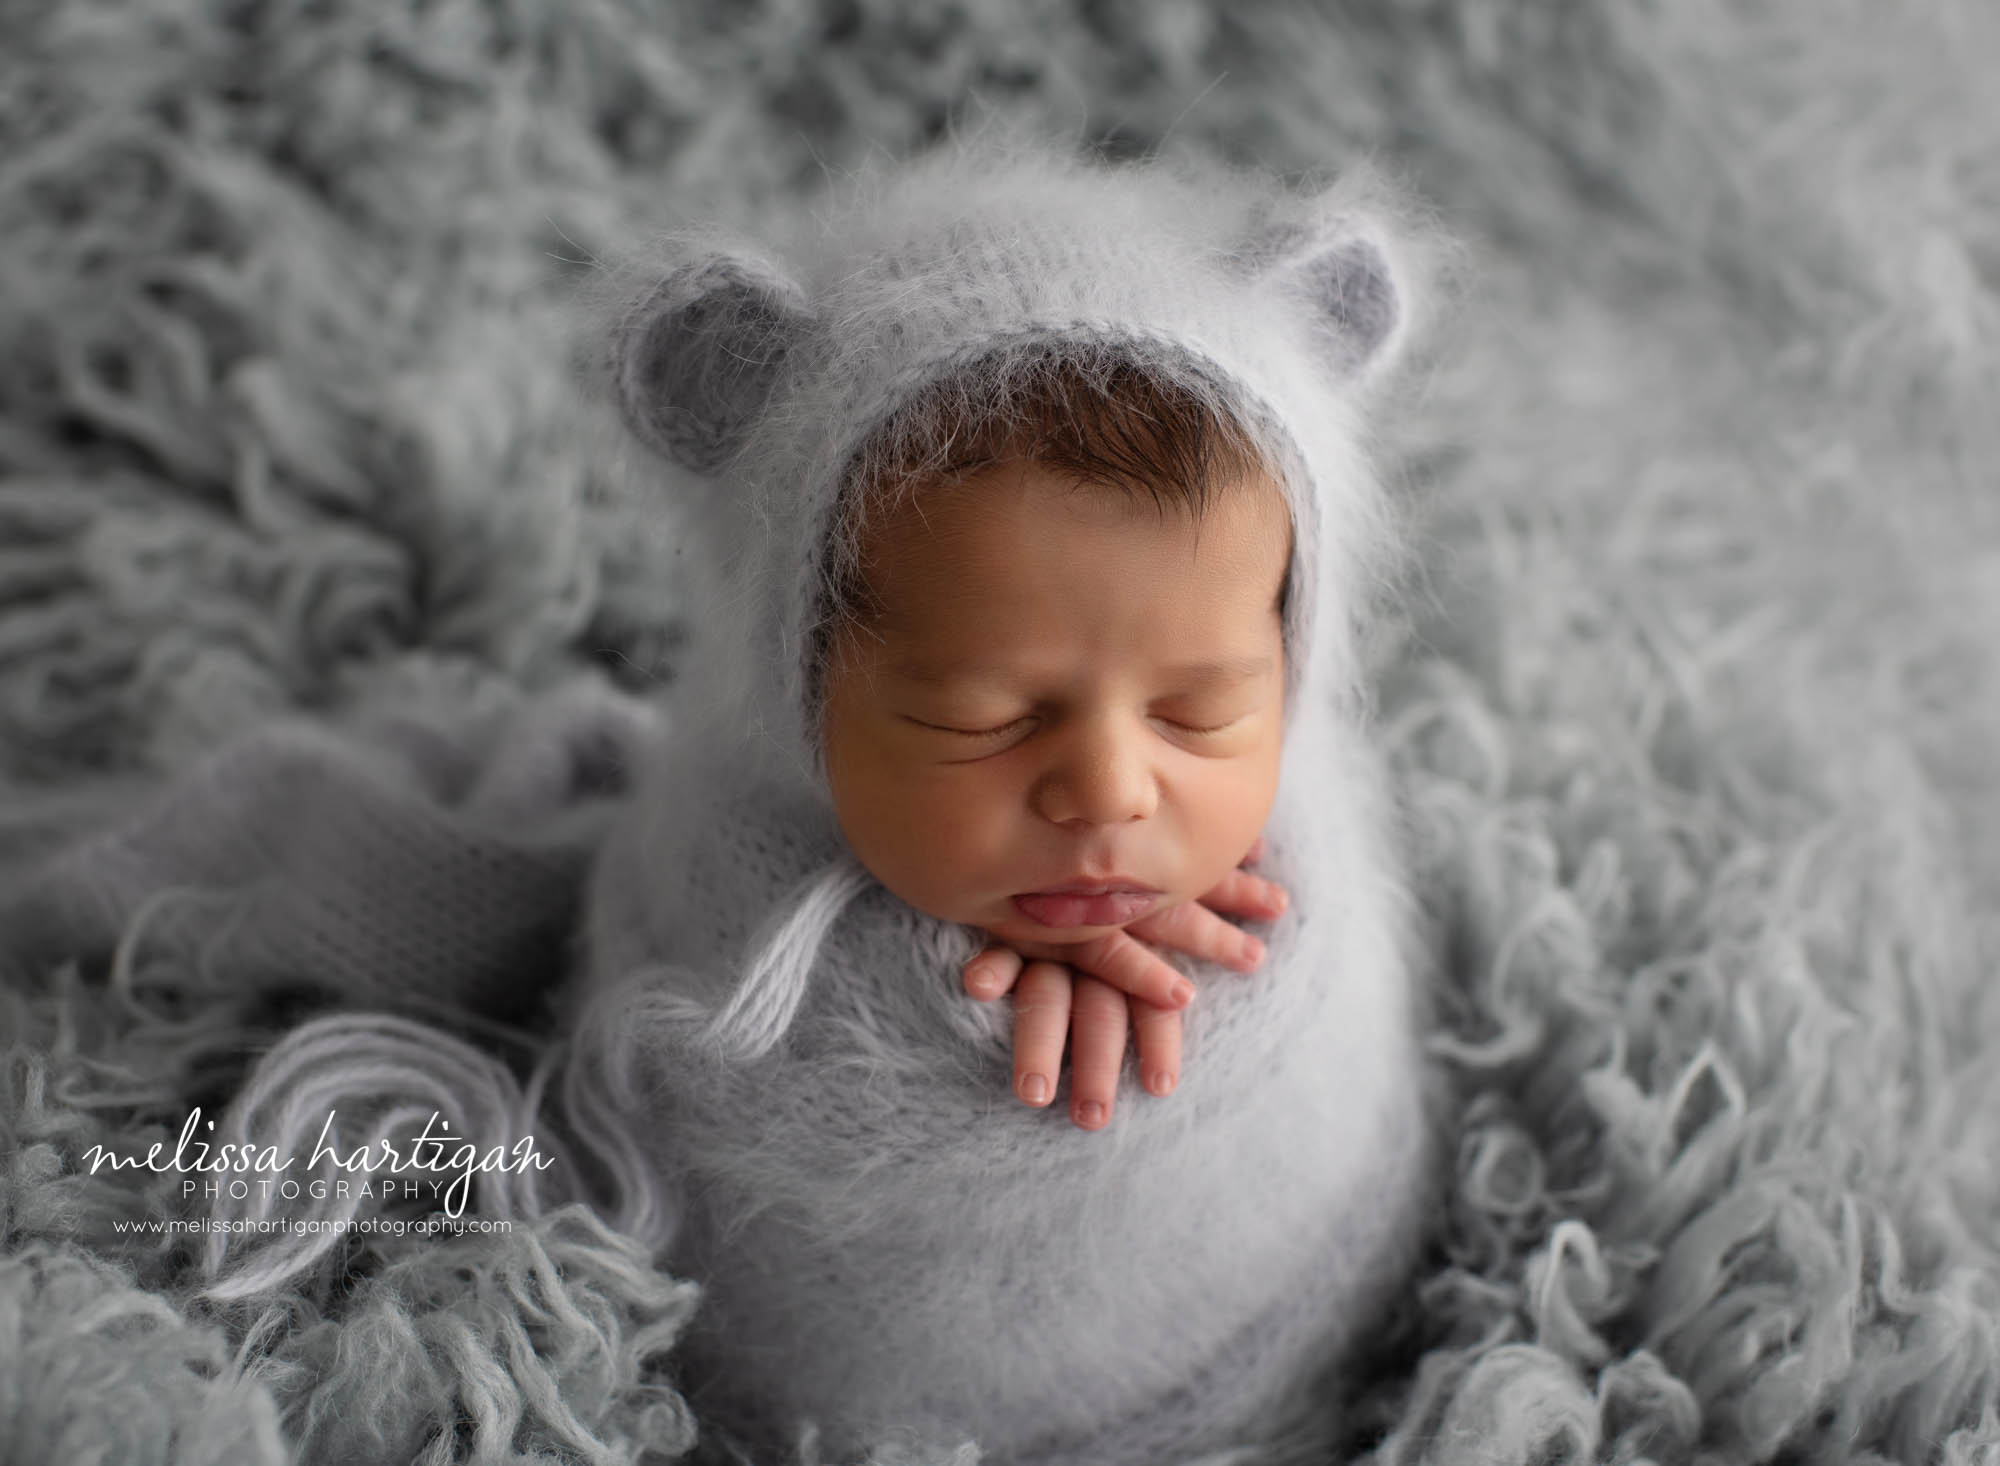 Newborn baby boy wrapped in grey knitted wrap with matching knitted bear bonnet